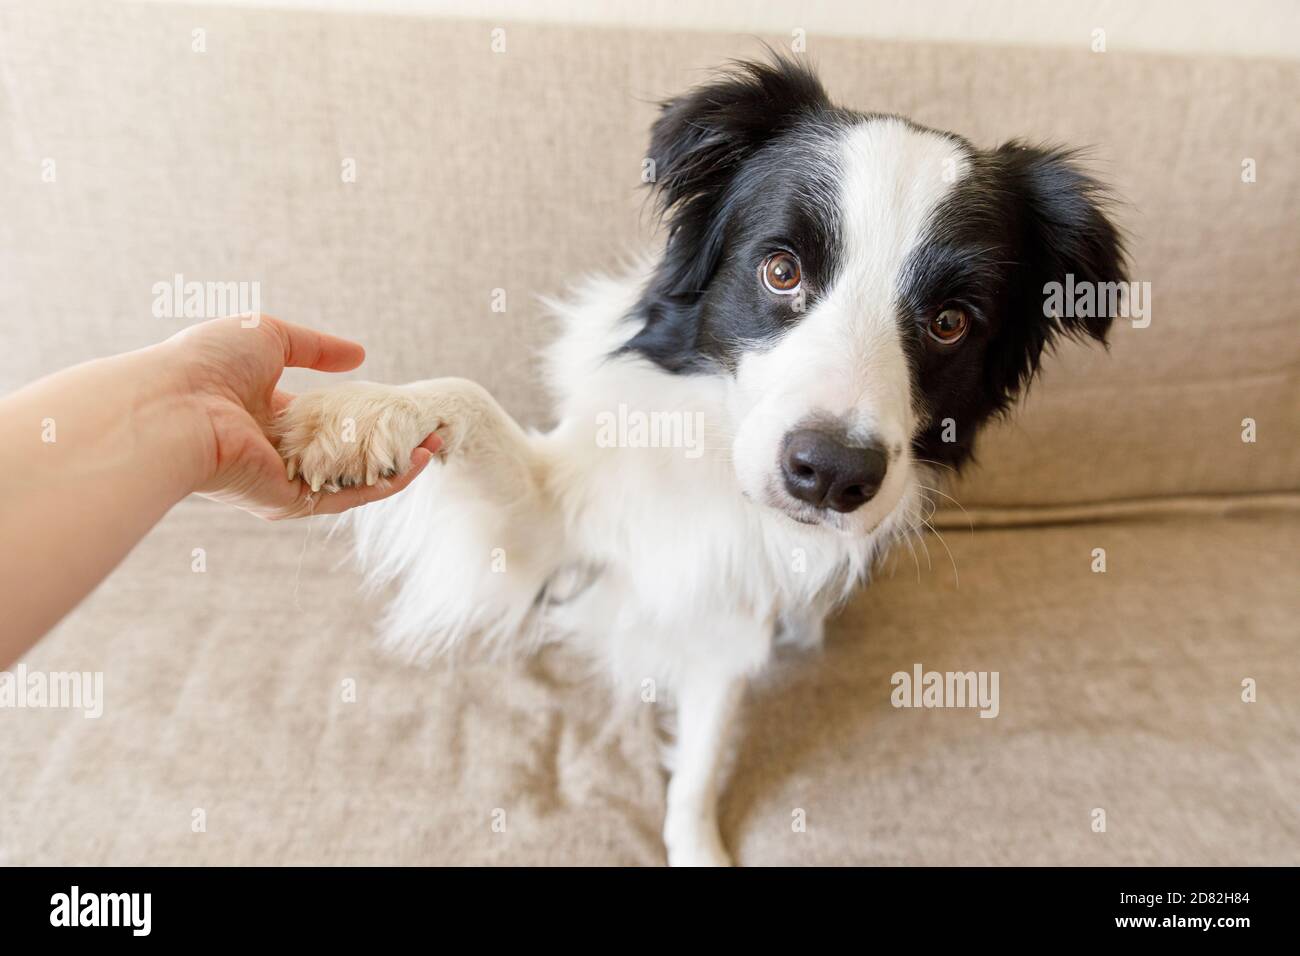 Funny portrait of puppy dog border on couch giving paw. Dog paw and human hand doing Owner training trick with dog friend at home indoors. friendship love support team